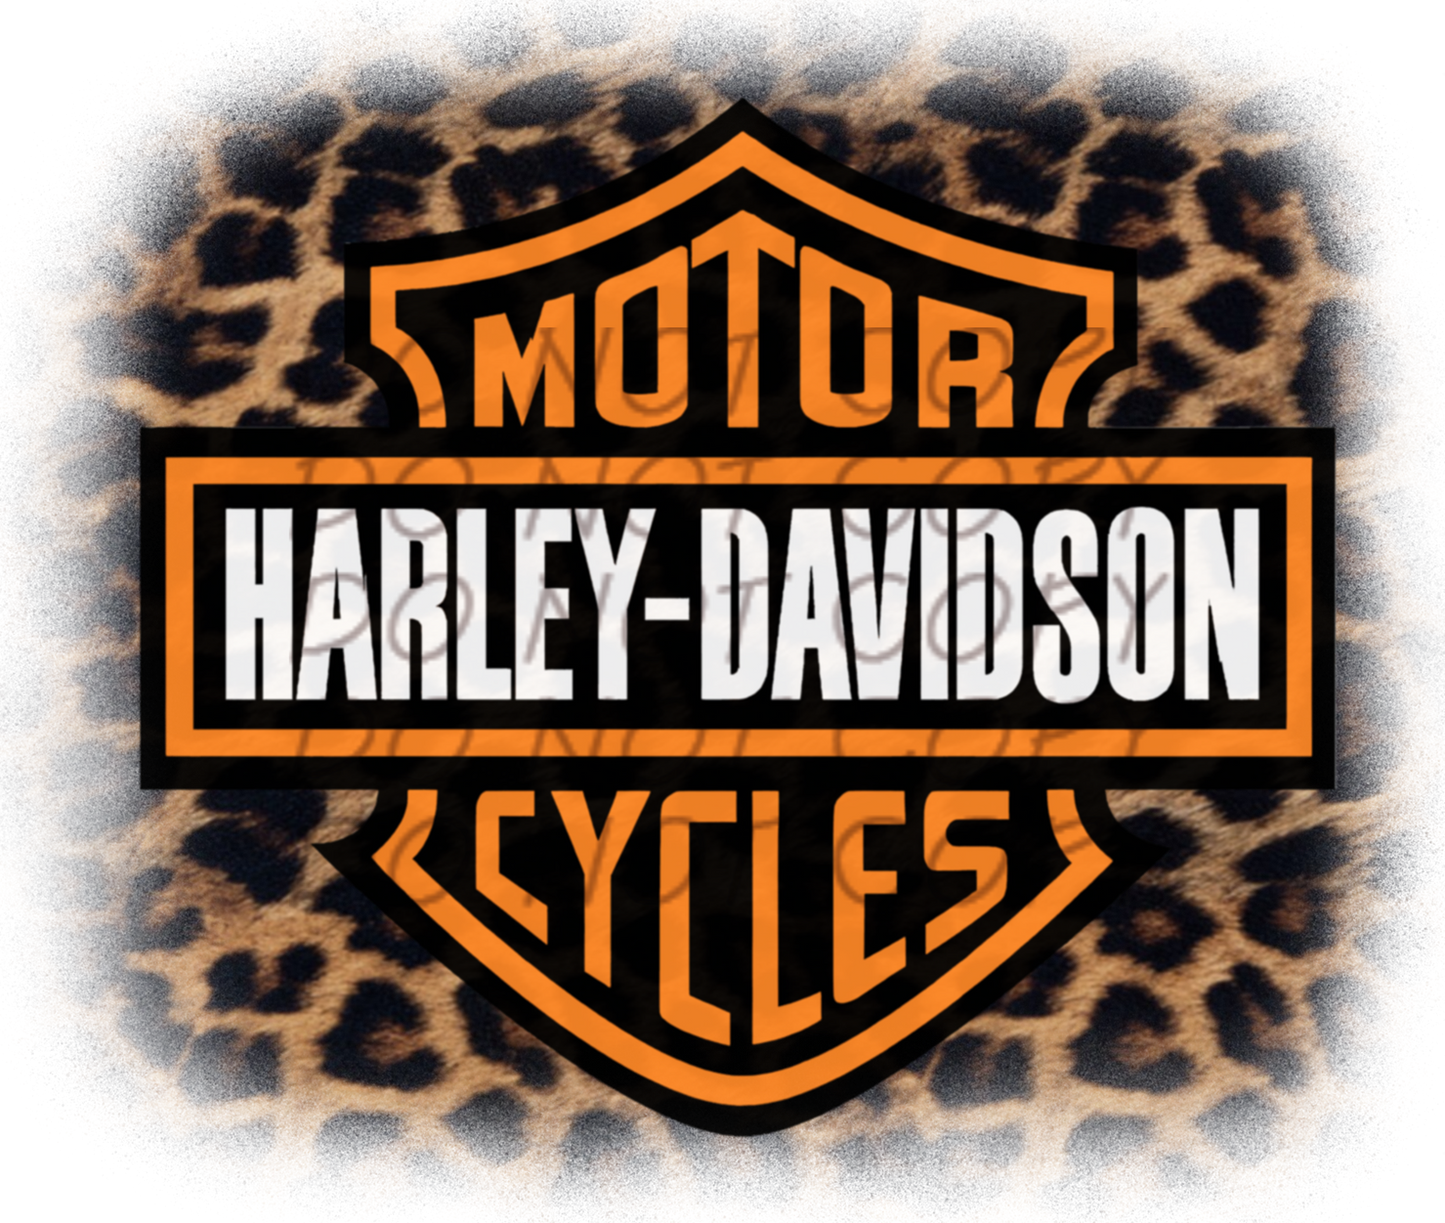 HD Motorcycle w/ Cheetah SUBLIMATION (400°)